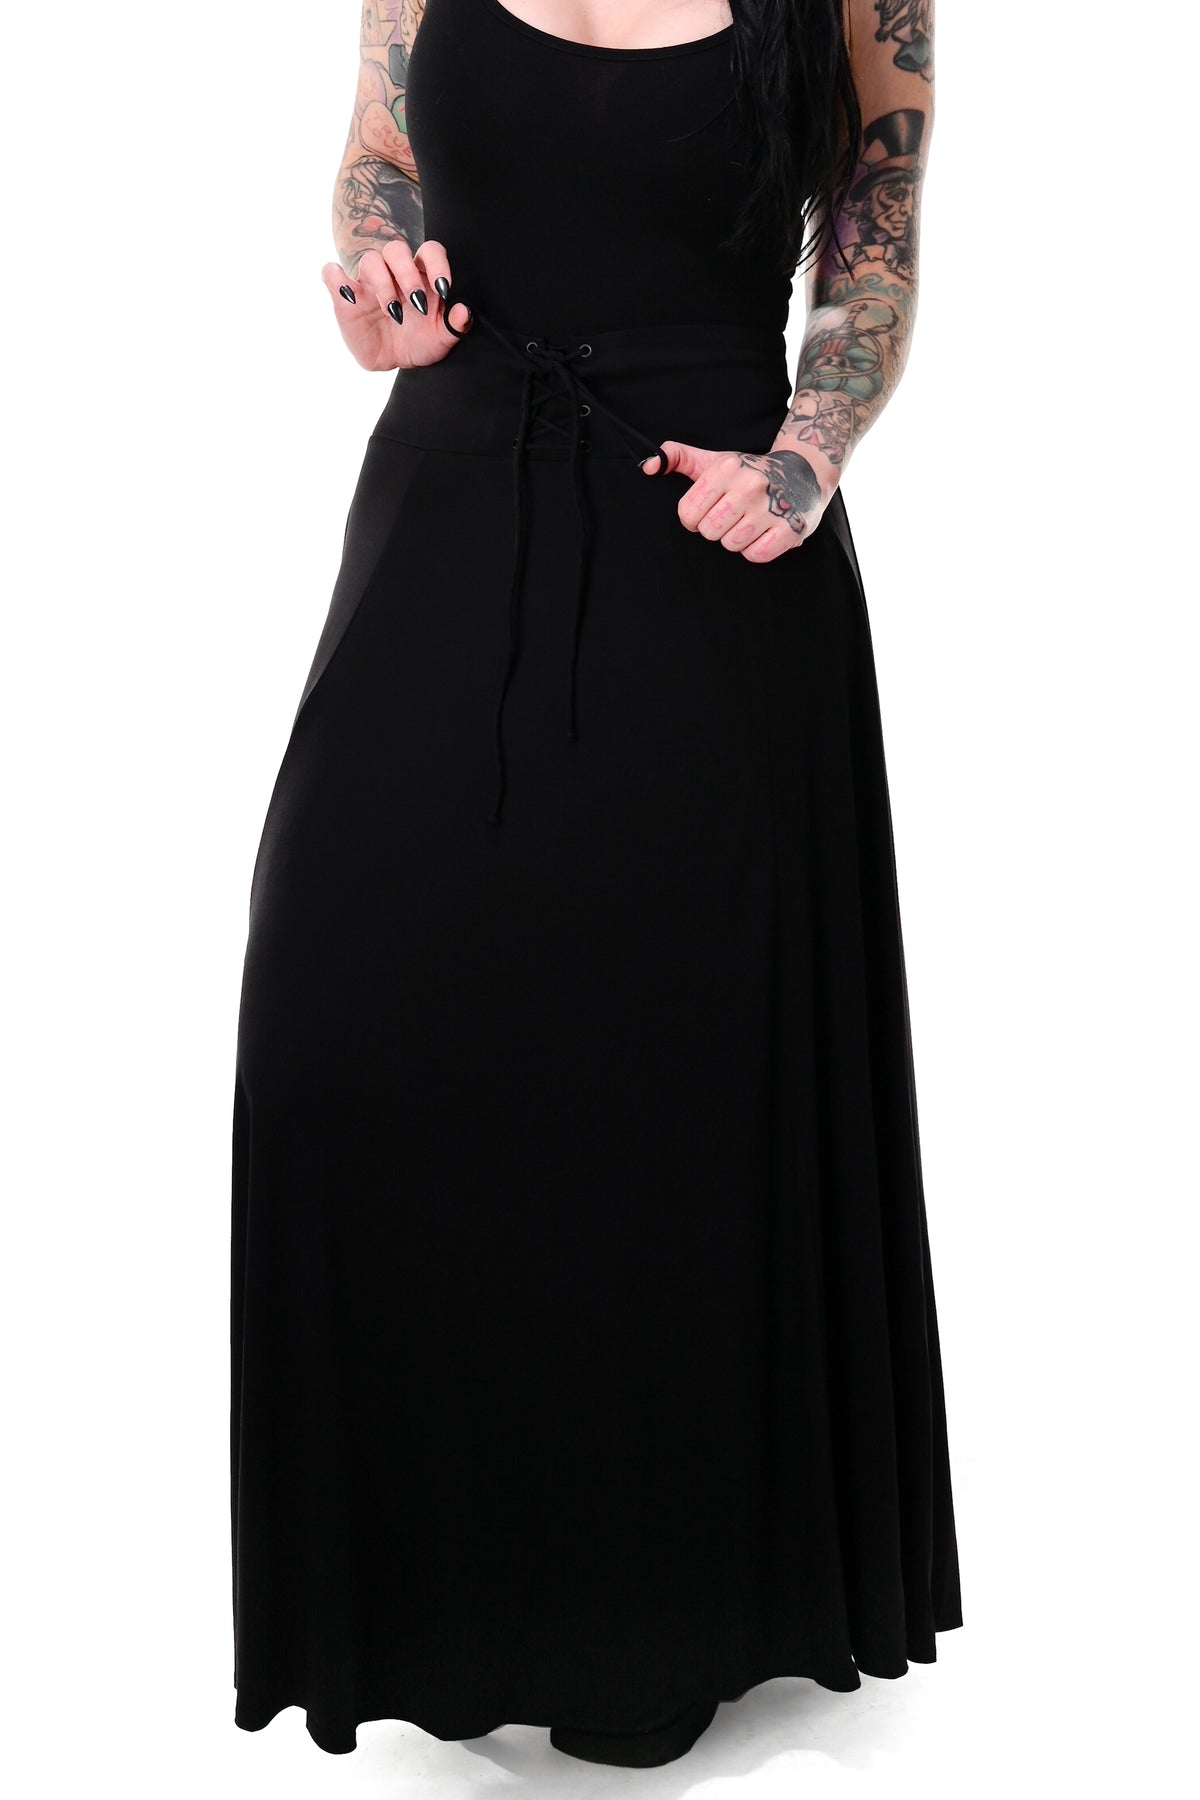 black high waisted maxi skirt with corset lace up front on waist